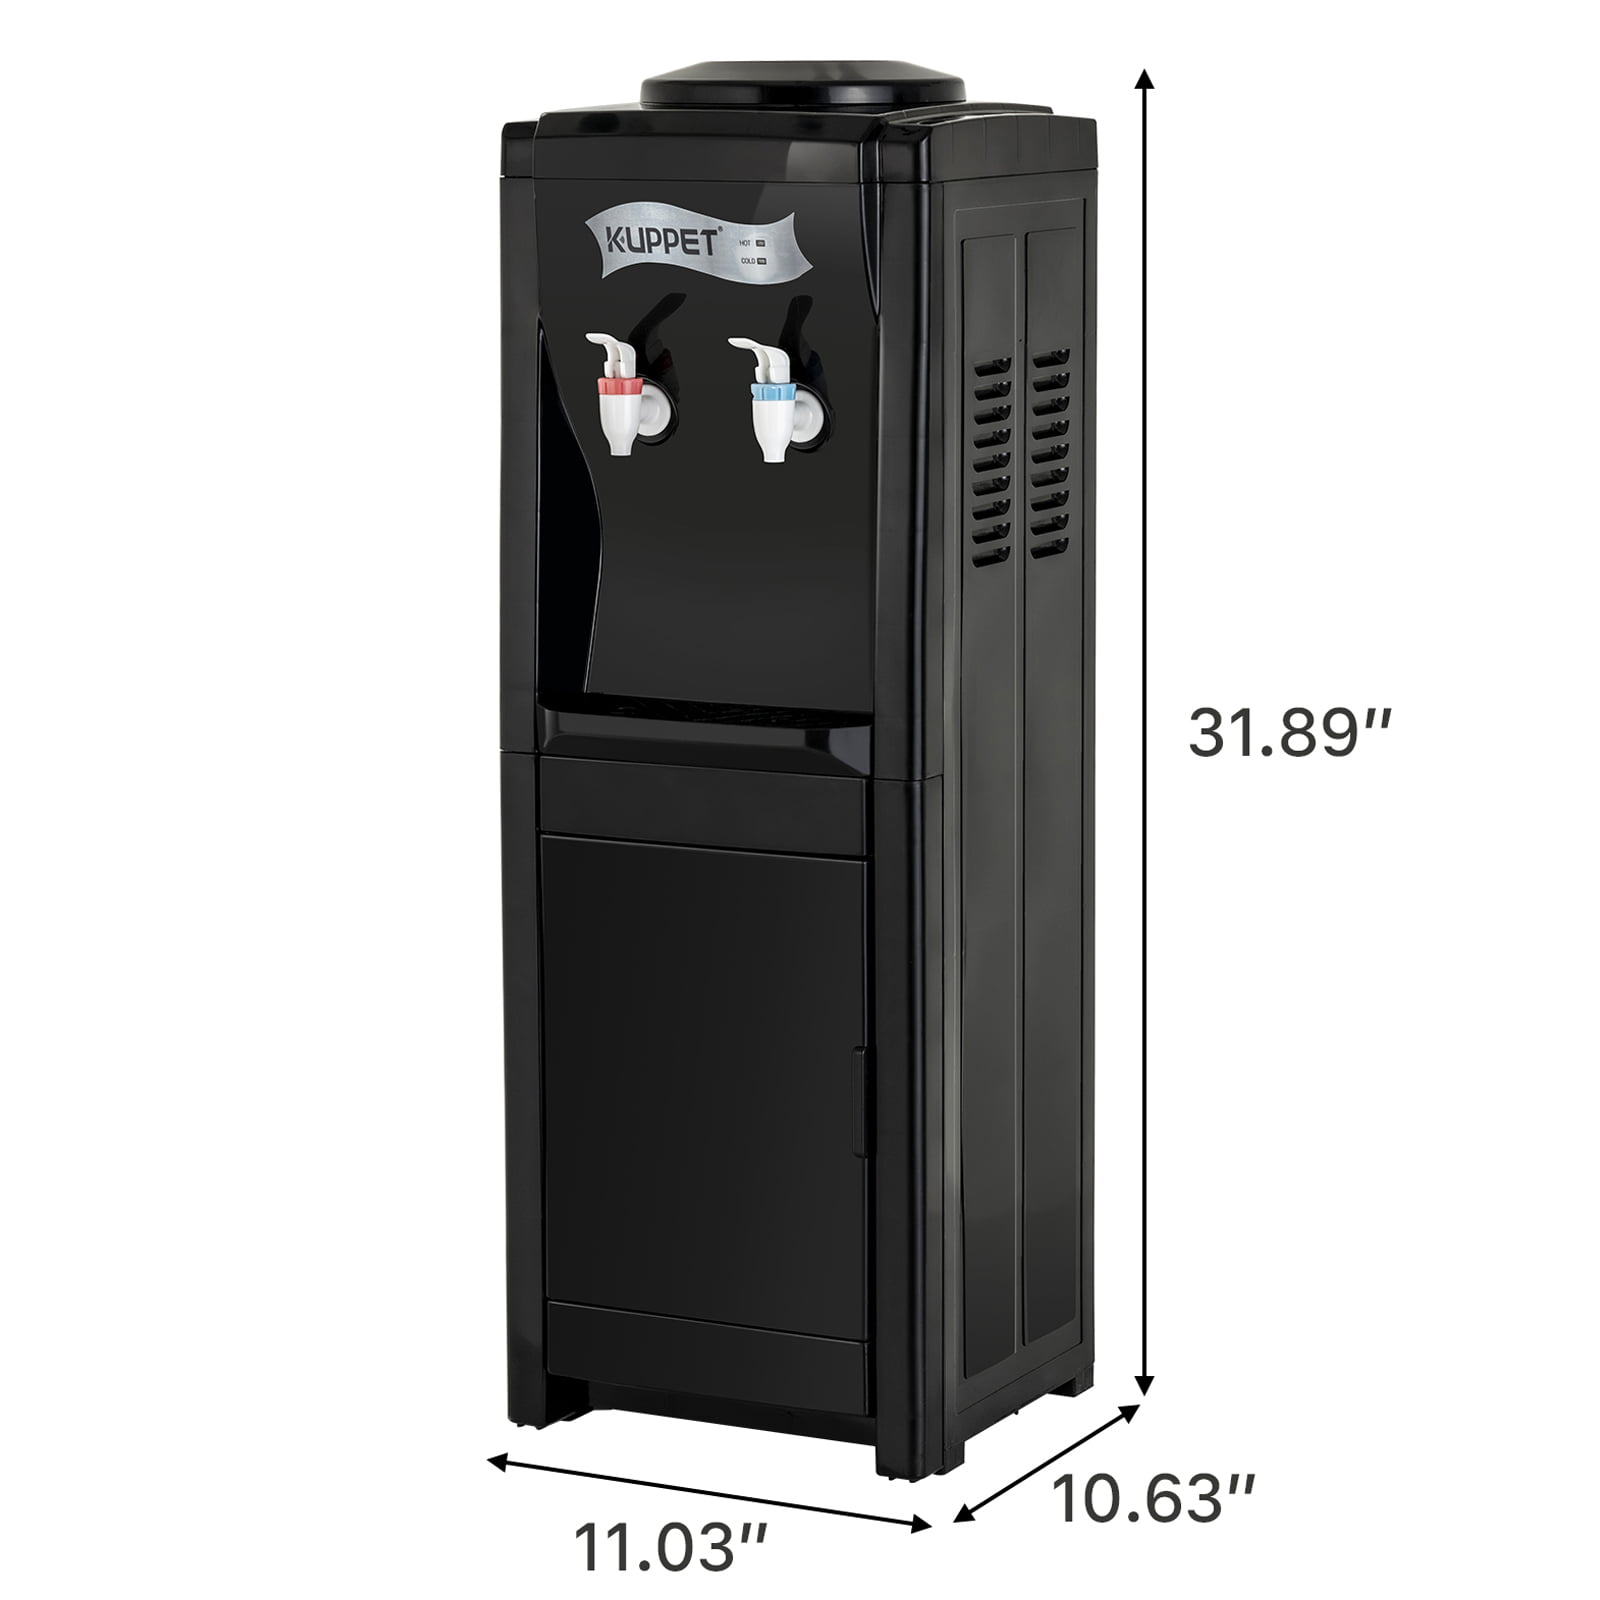 Details about   Kuppet 5 Gallon Top Loading Electric Hot ＆Cold Water Cooler Dispenser Black NEW! 